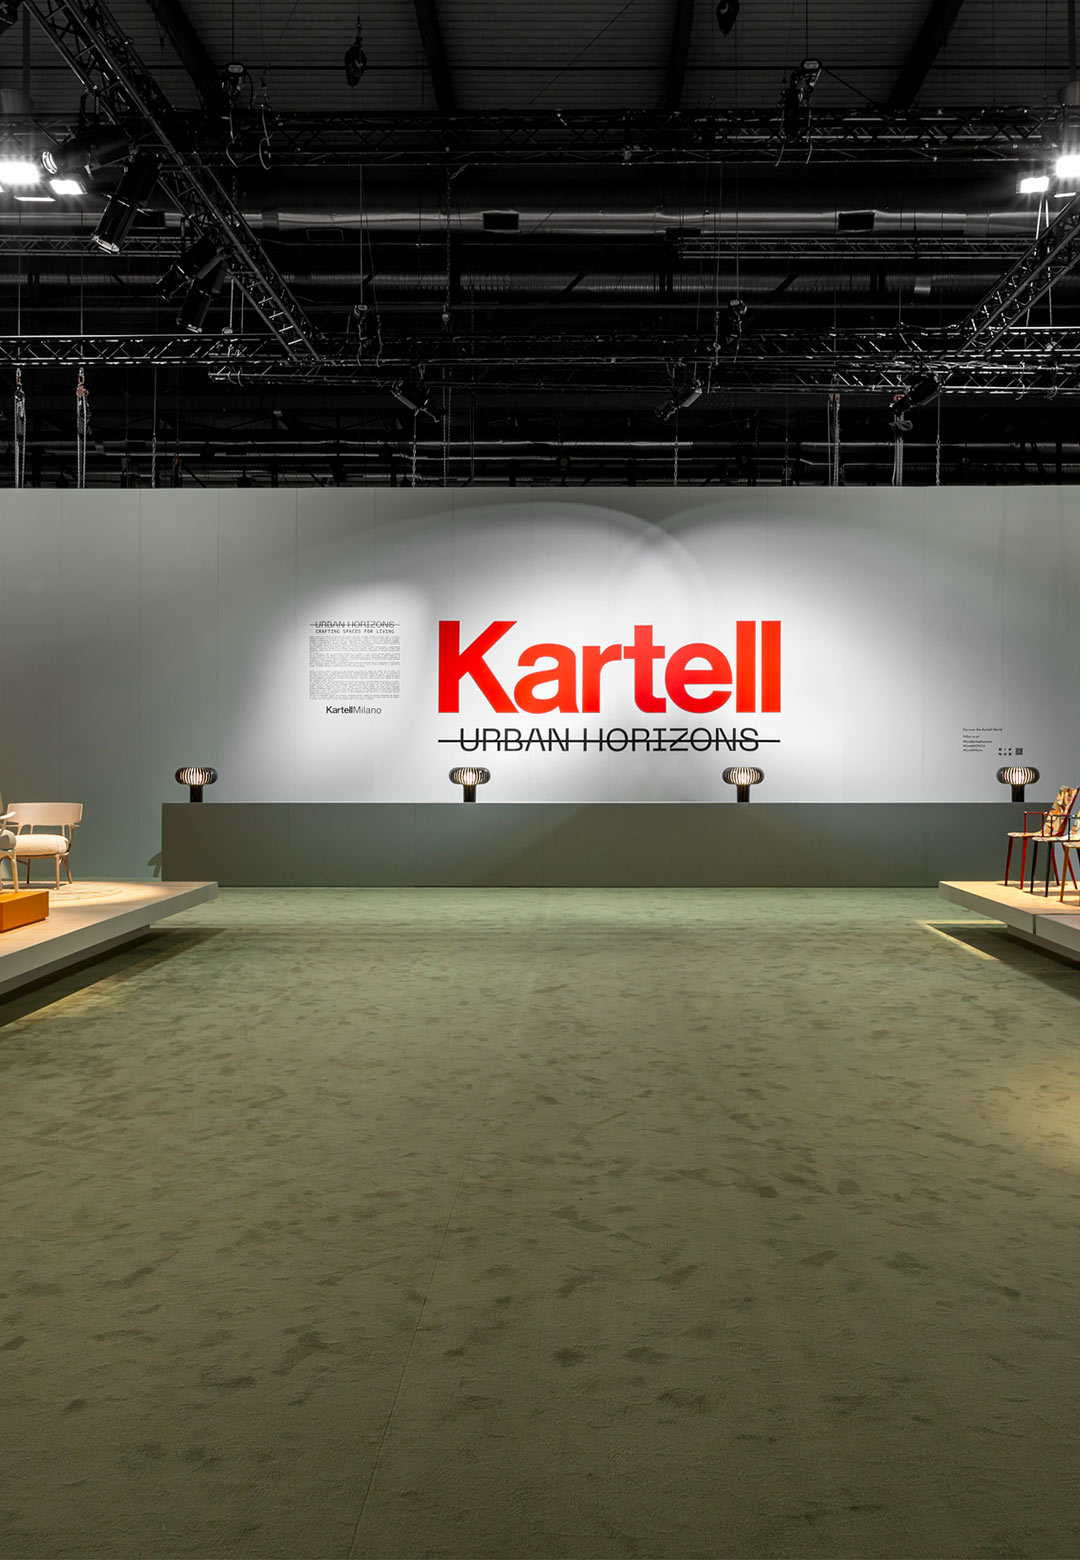 Kartell crafts spaces for living with 'Urban Horizons' at Salone del Mobile